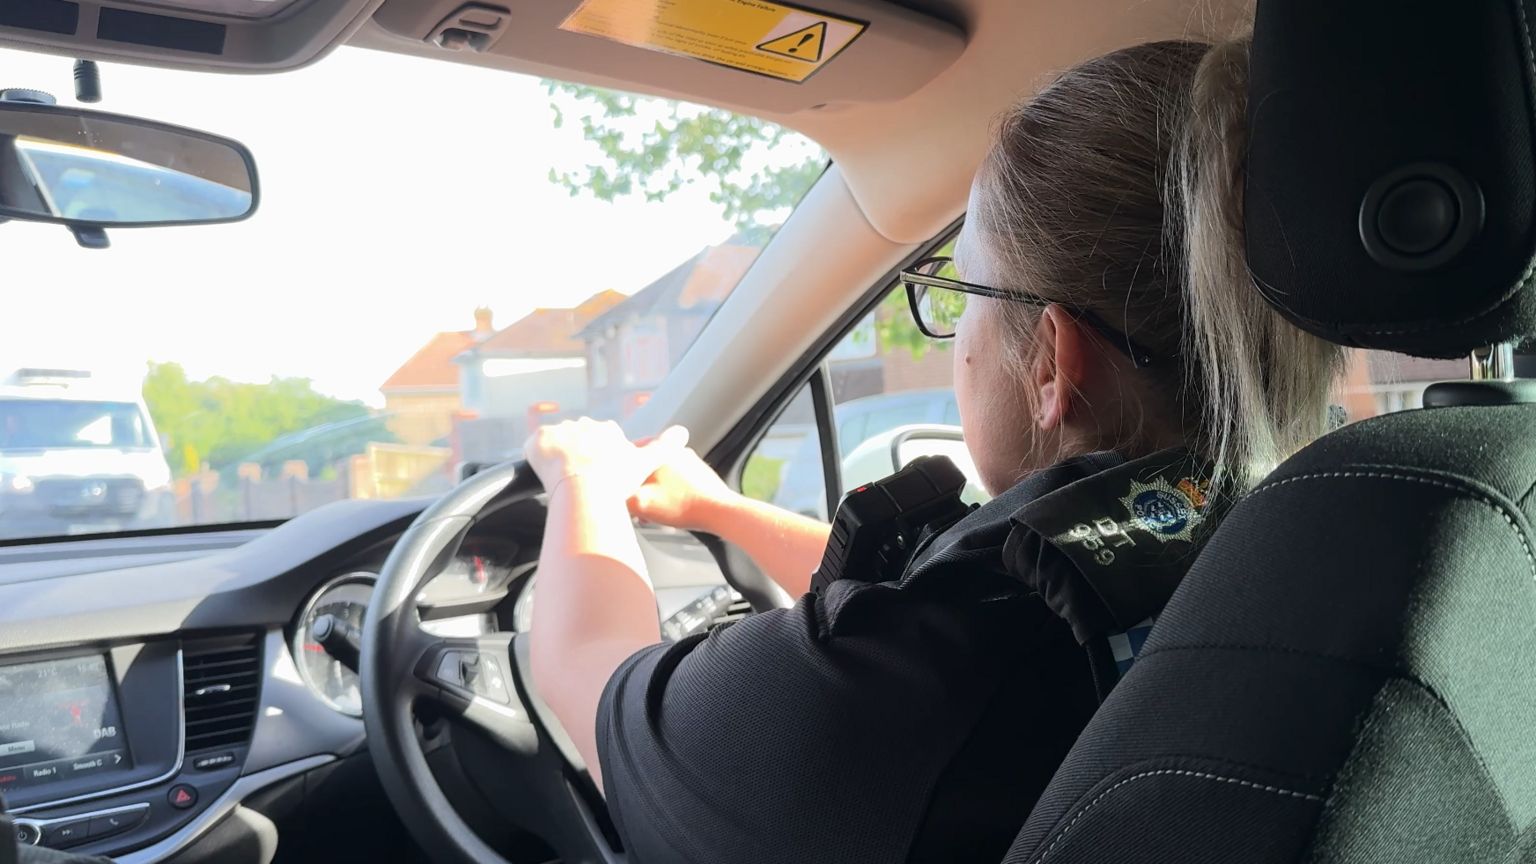 A Sussex police officer is driving a police car, as seen from the rear seat of the car